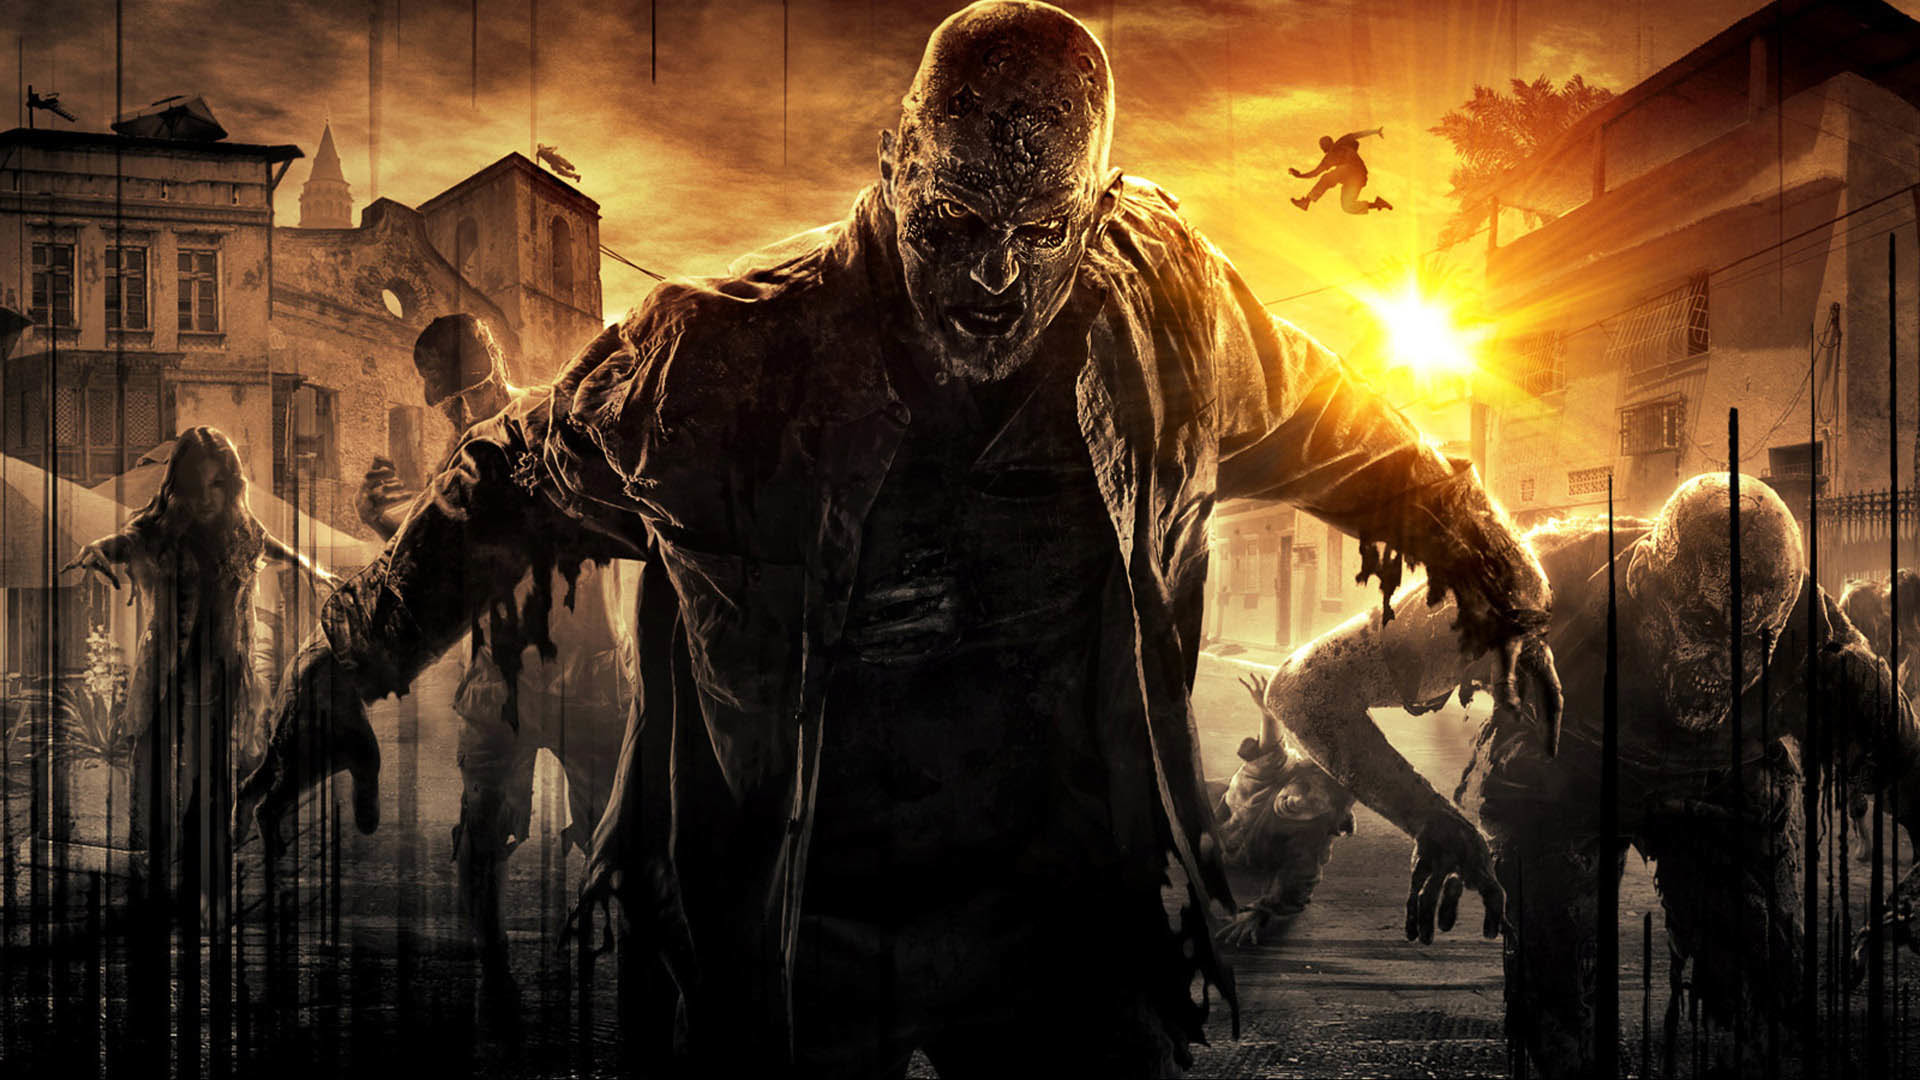 1920x1080 zombie wallpapers - Google Search